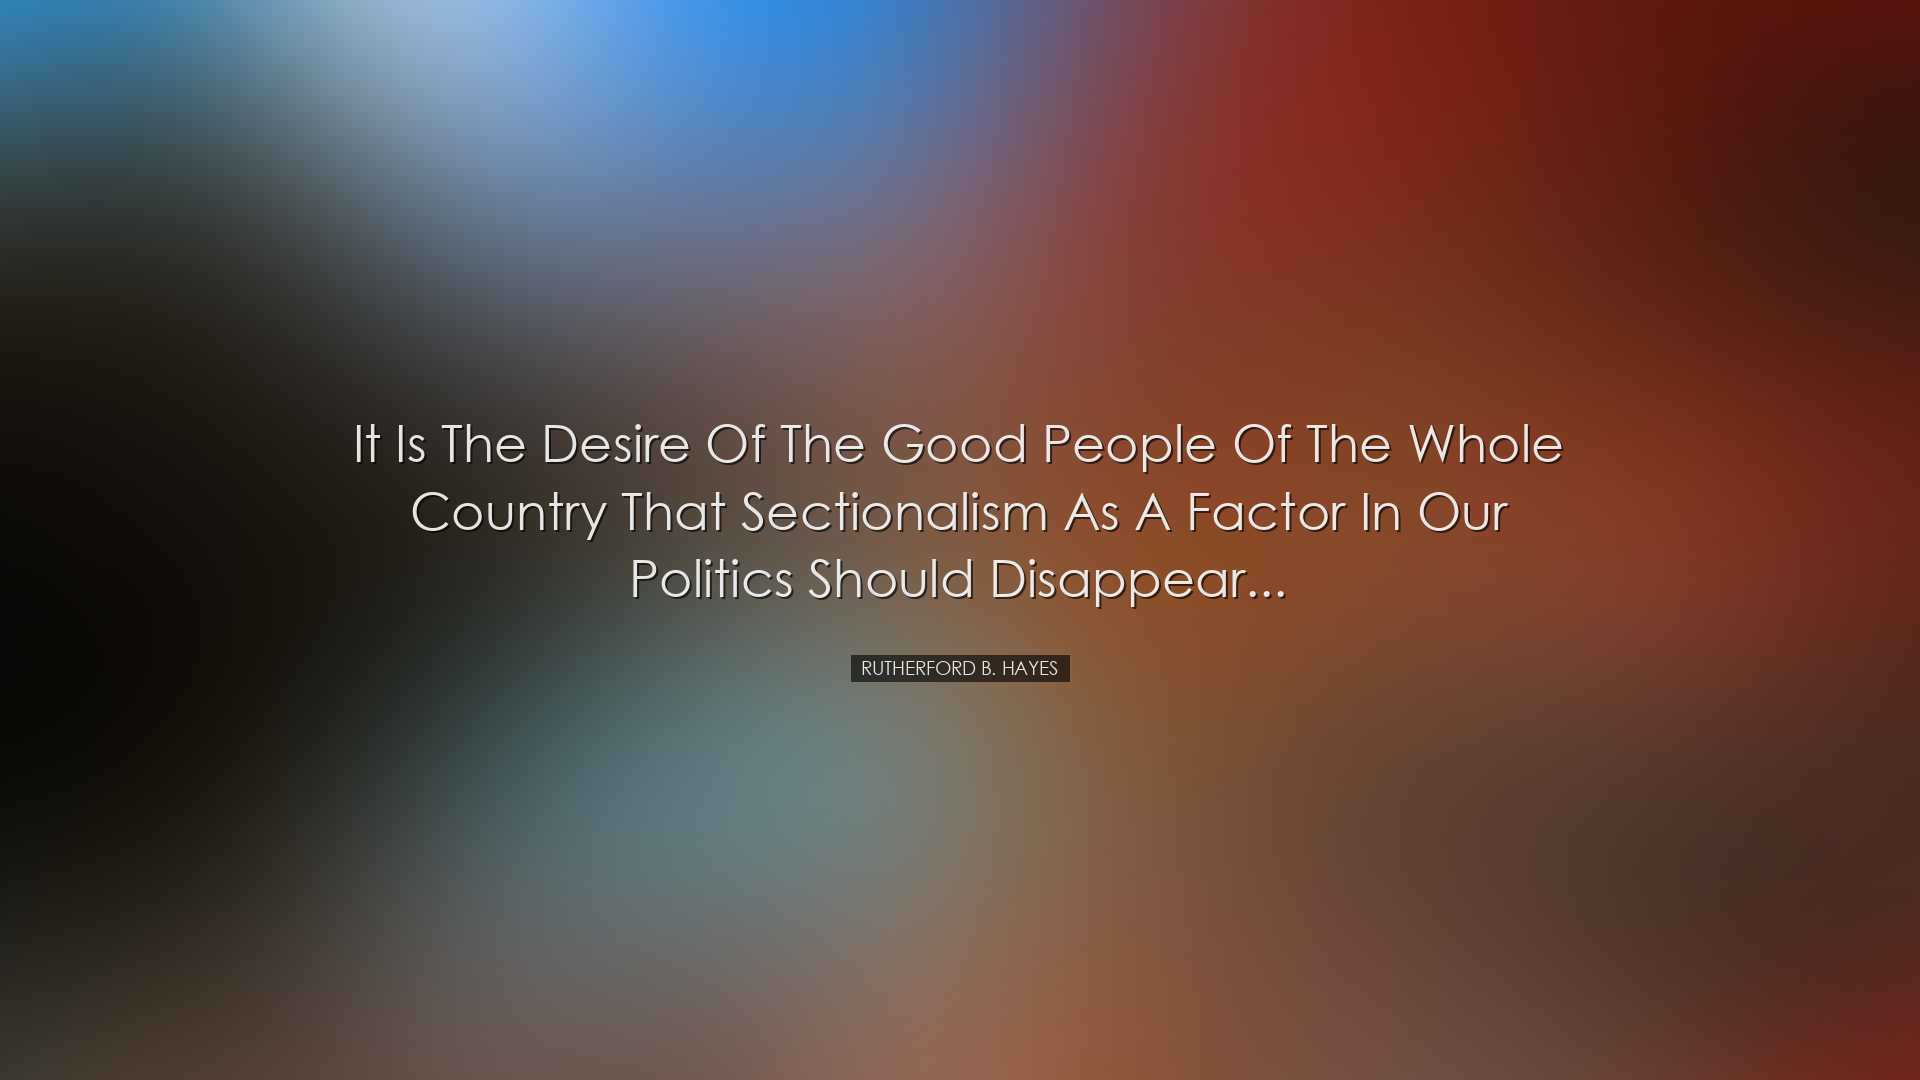 It is the desire of the good people of the whole country that sect